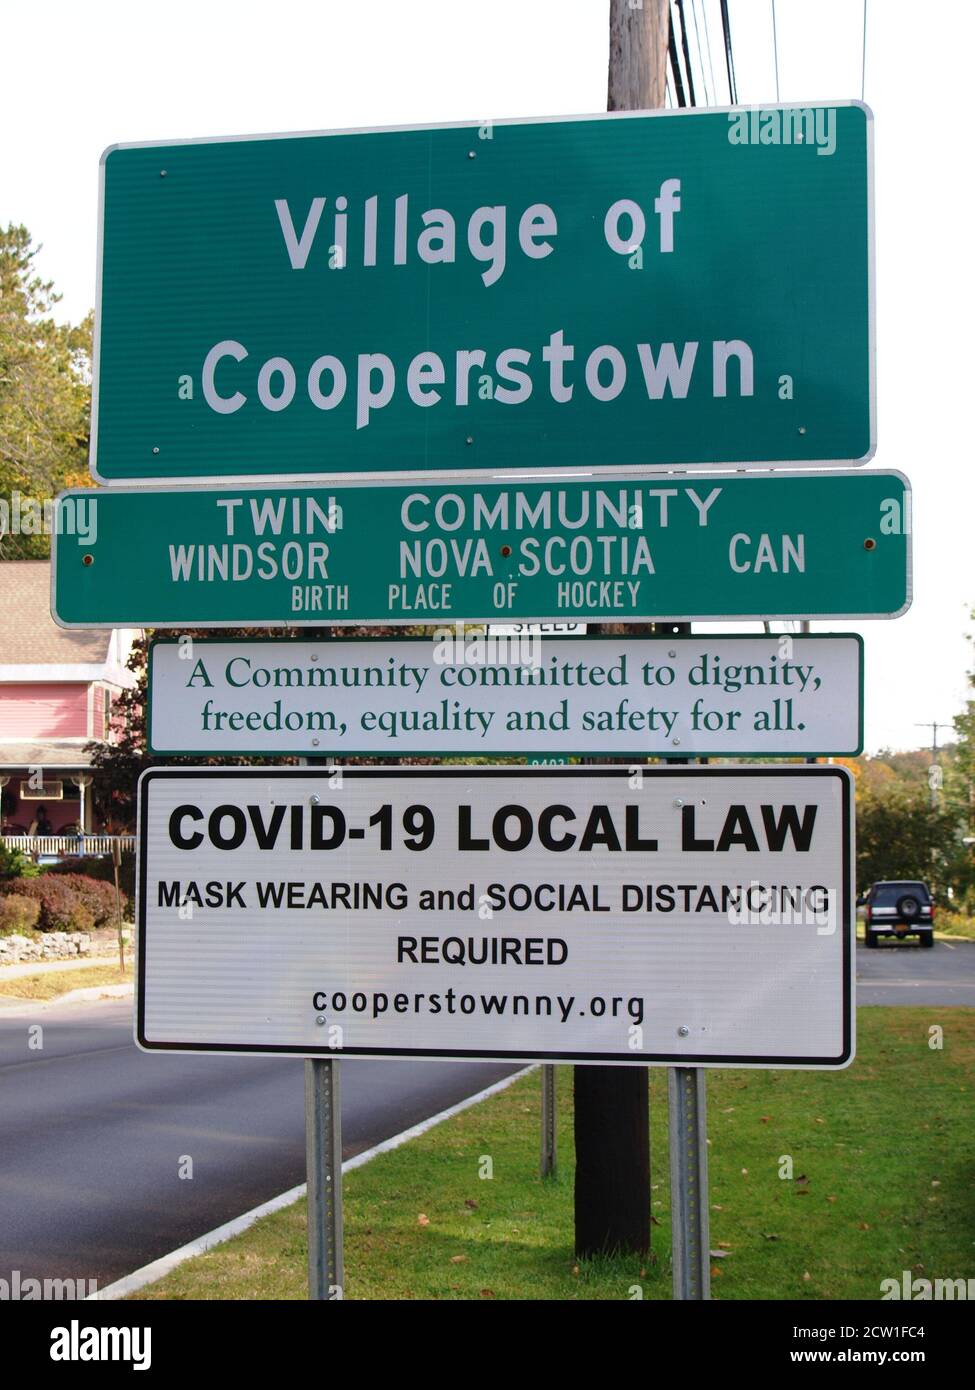 American municipal sign during 2020 Covid 19 outbreak says mask wearing and social distancing required as per local law in Cooperstown, NY Stock Photo